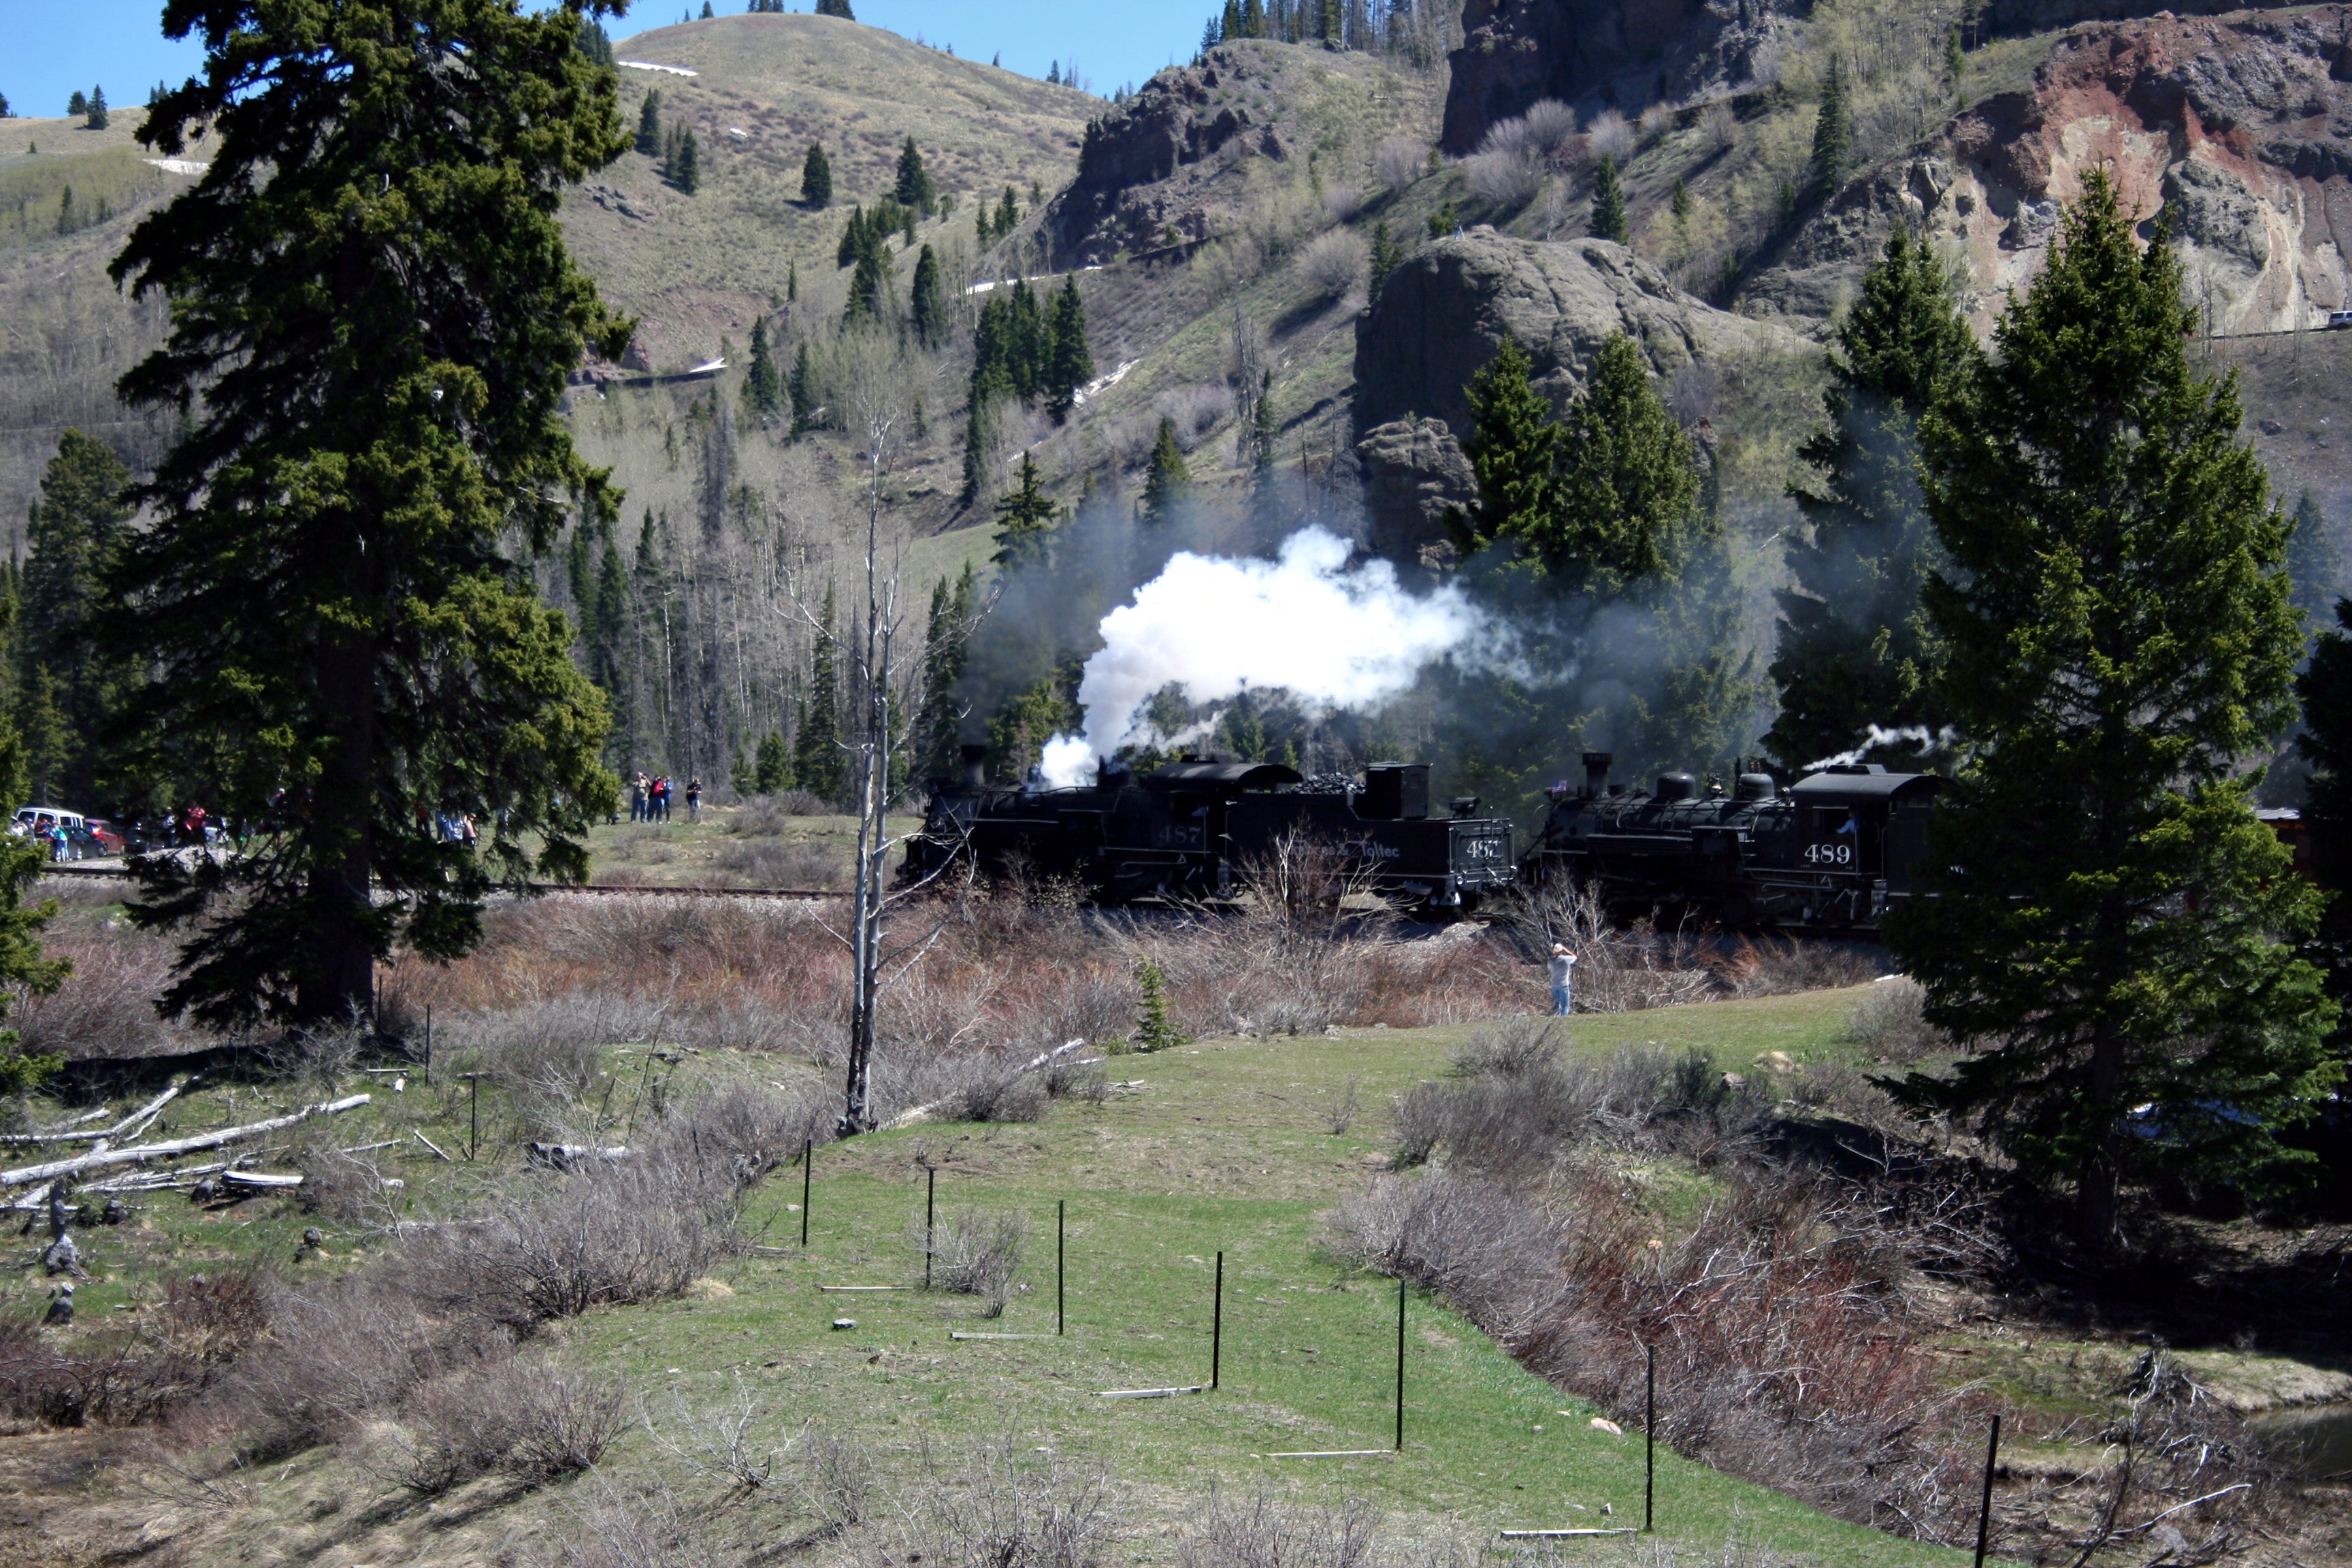 The steam train crosses the road to Chama and the Ponderosa campground is between the crossing and Antonito CO.